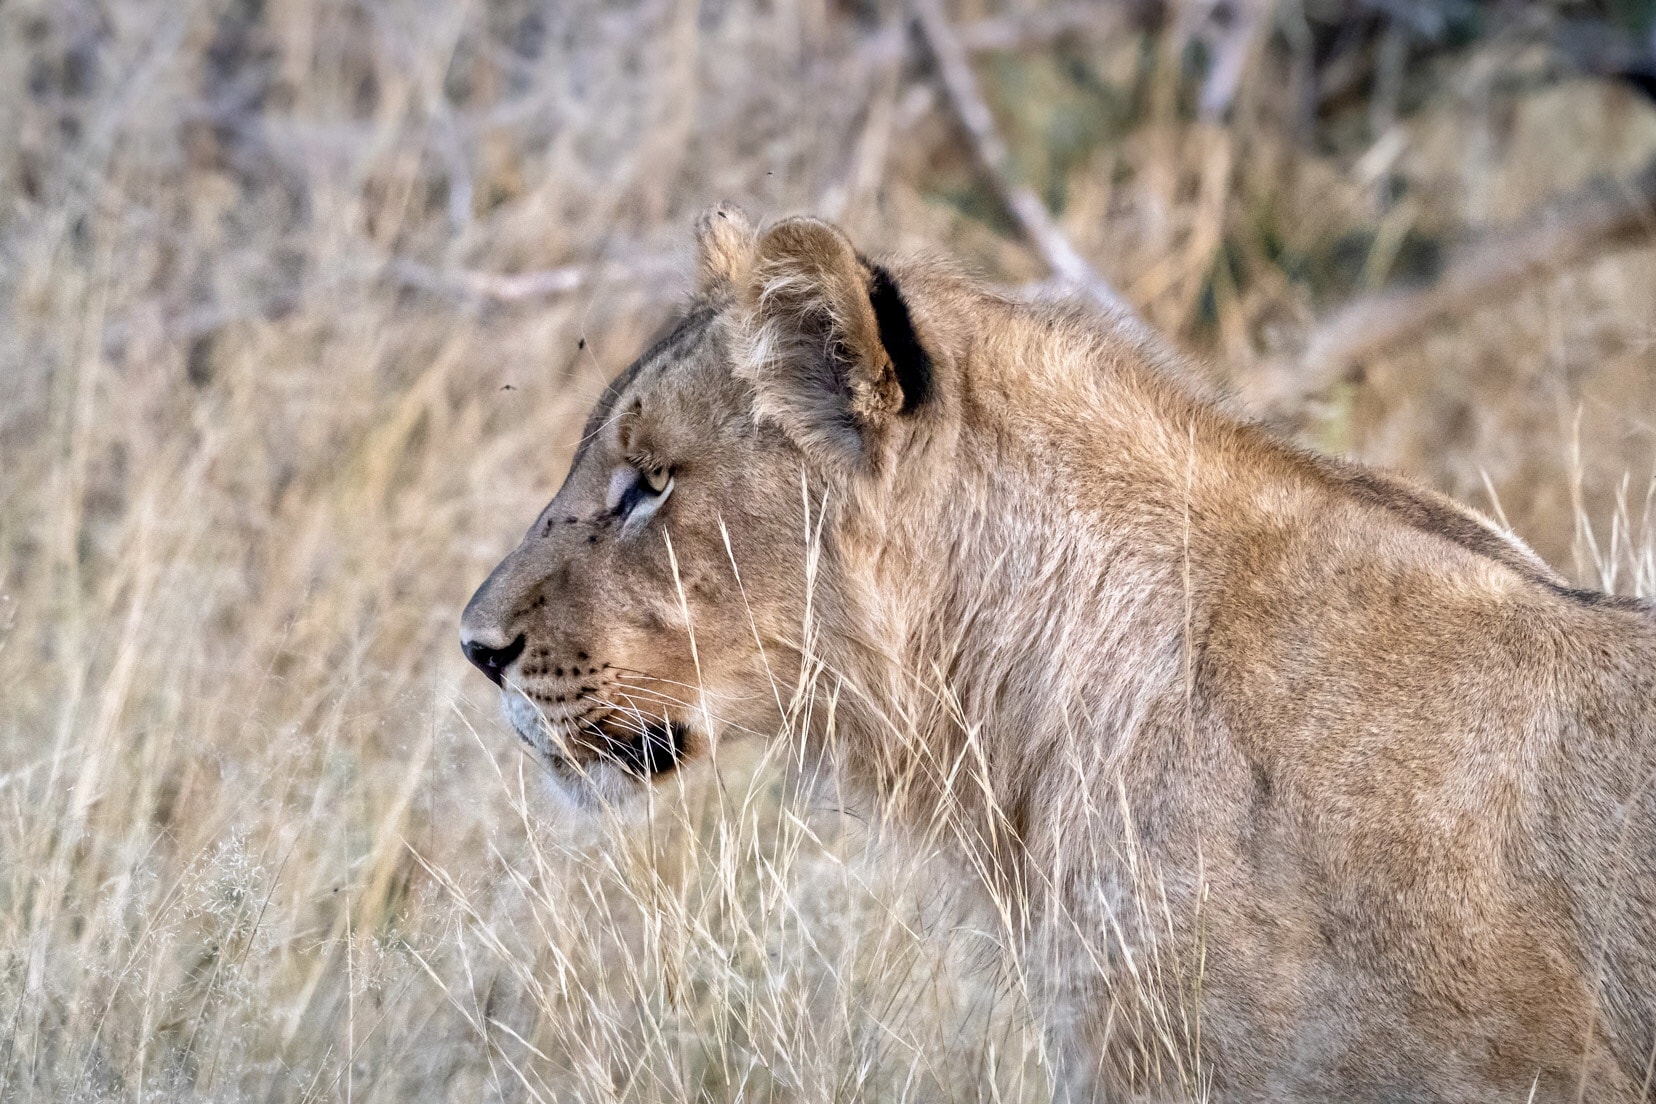 lioness_focussing with intent in the grass